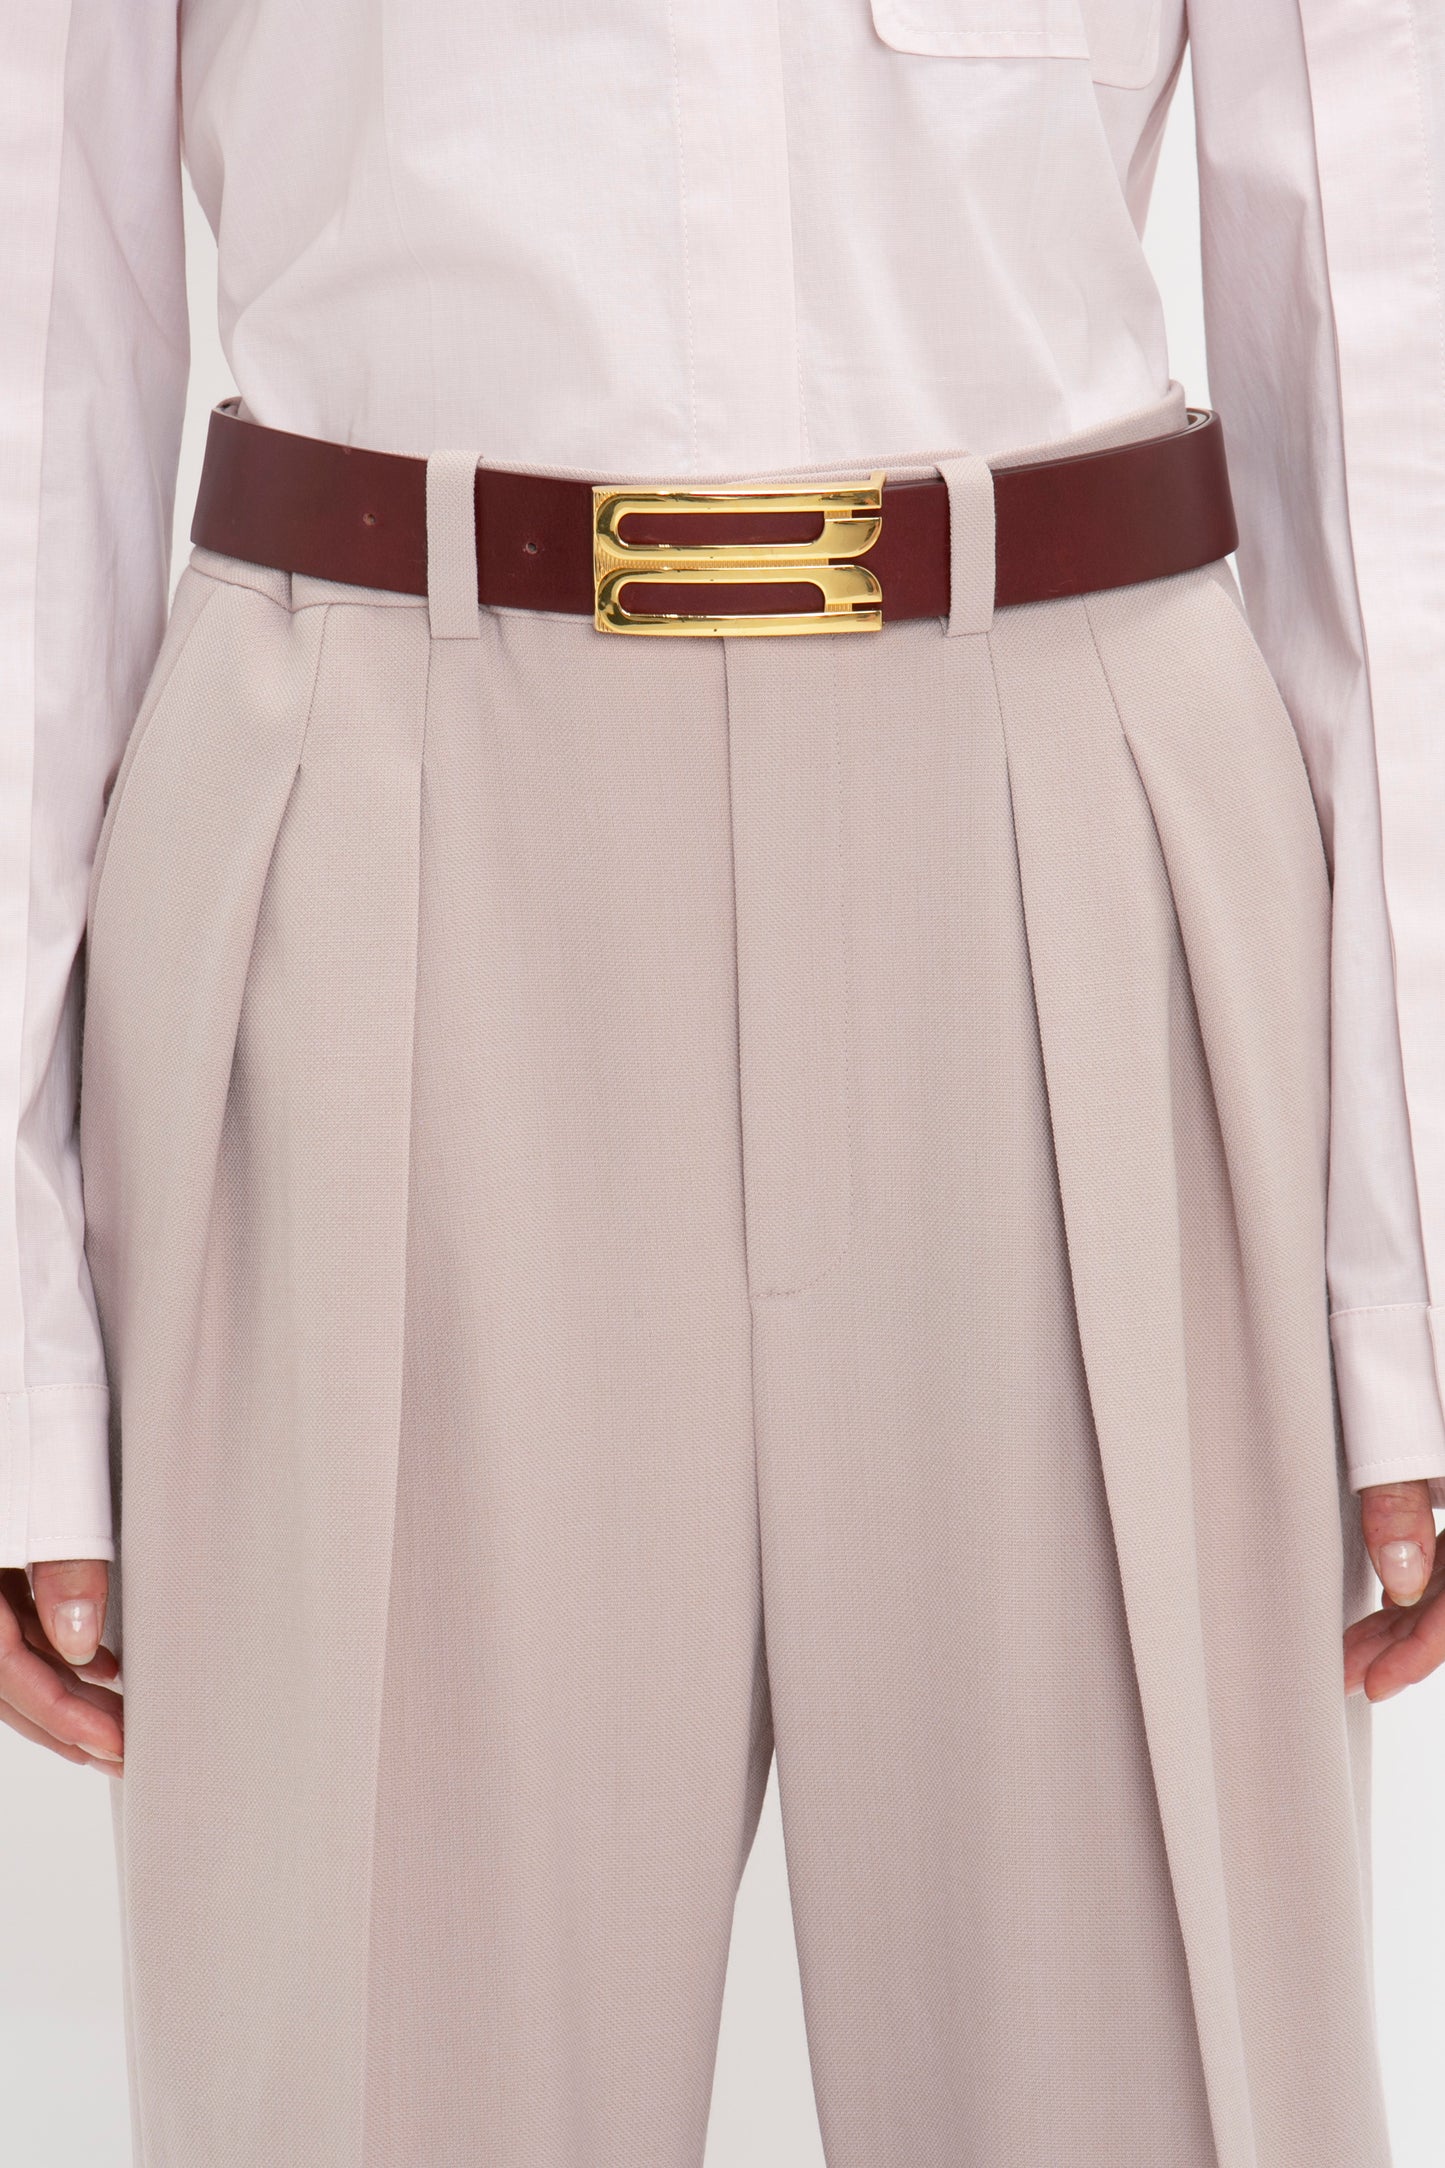 Close-up of a person wearing beige high-waisted pleated trousers, a white shirt, and a Jumbo Frame Belt In Burgundy Leather by Victoria Beckham with a gold rectangular buckle. The look is completed with contemporary Burgundy shoes made of calf leather.